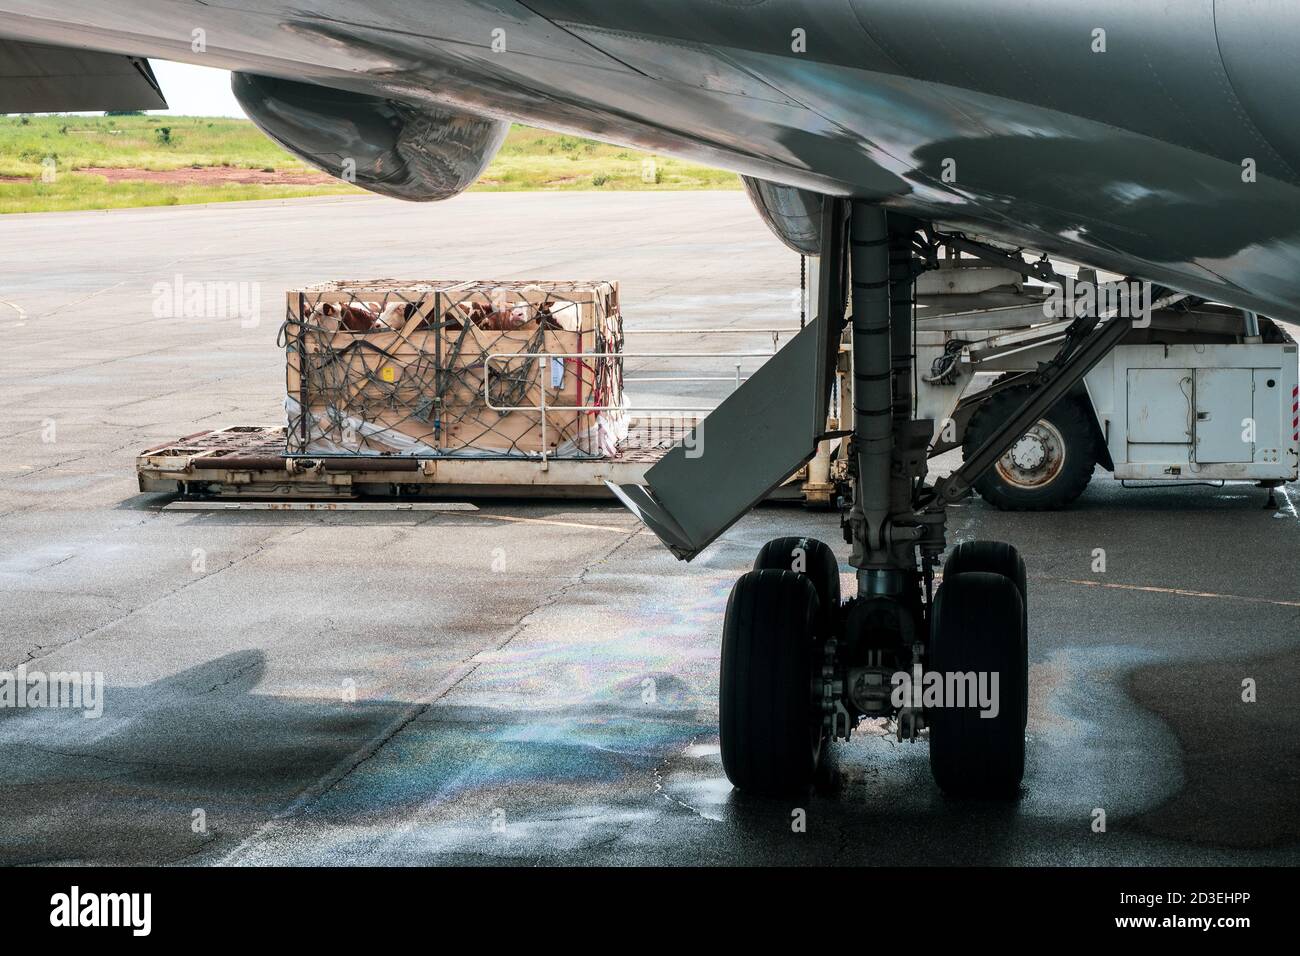 Livestock in wooden boxes secured by nettings being offloaded by a high-loader from the lower cargo hold of a Jumbo Jet Stock Photo